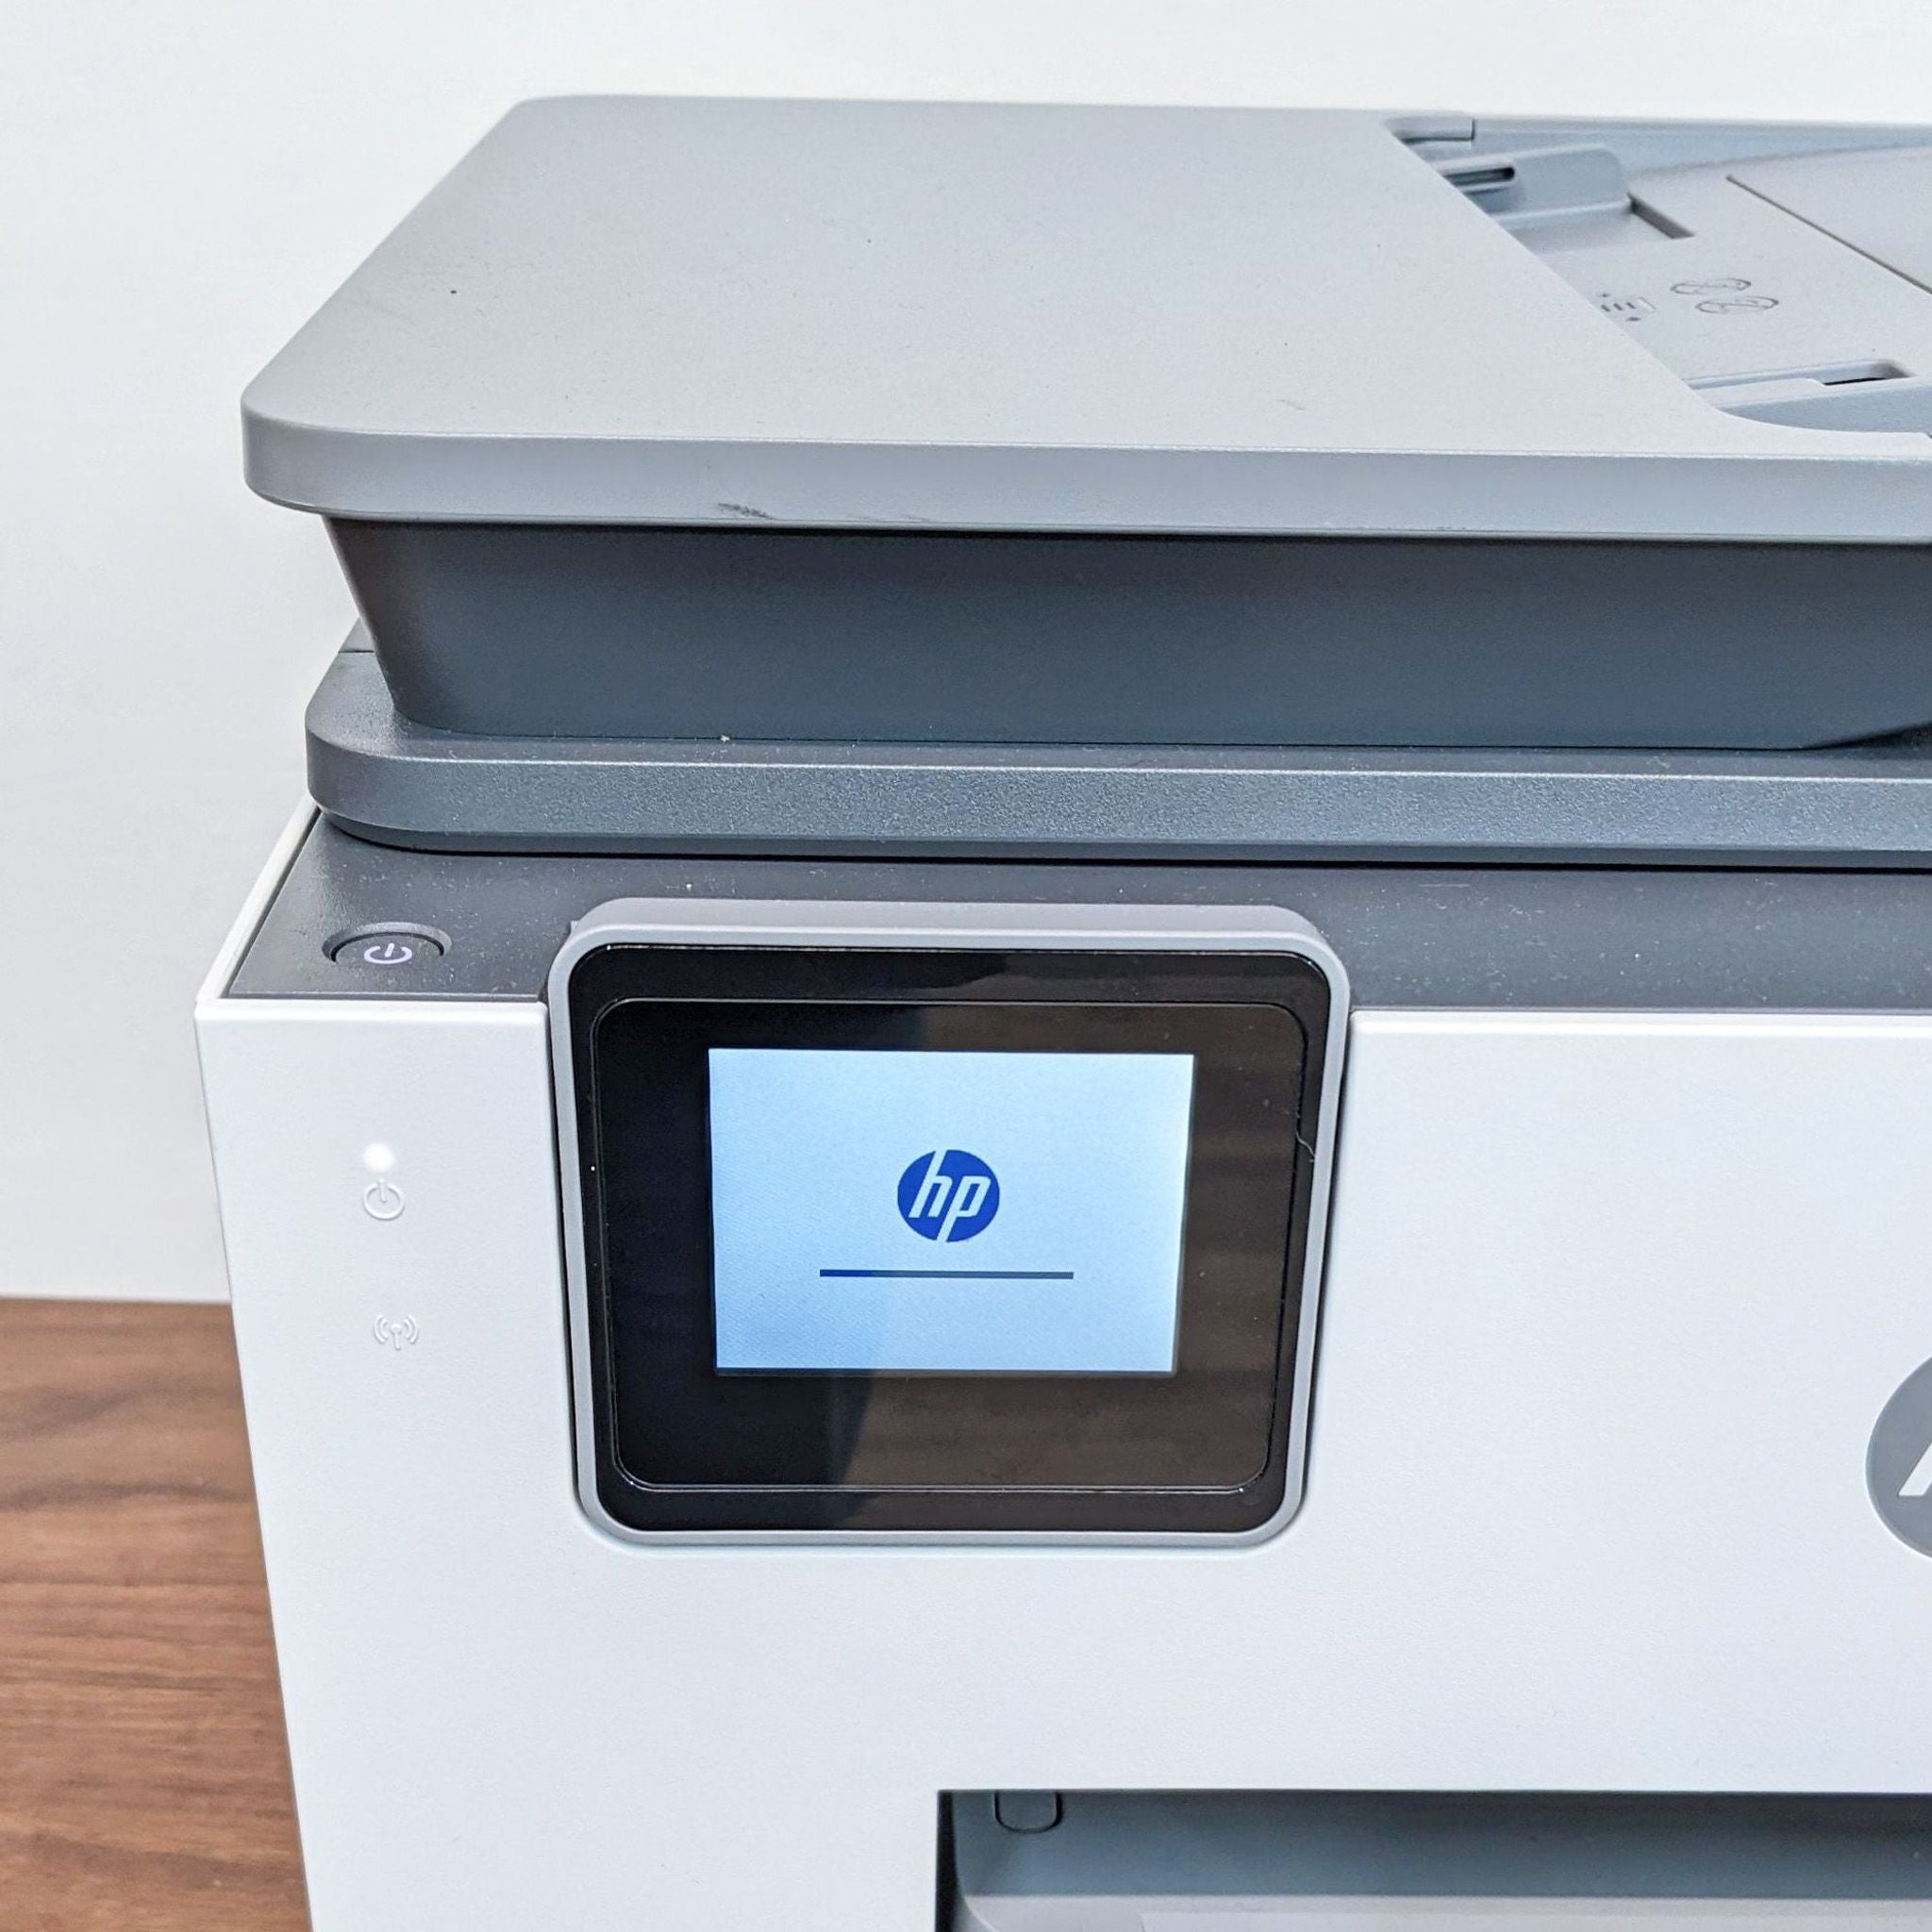 HP All-in-One printer from a side angle with cover closed, highlighting its compact design and touch screen panel.